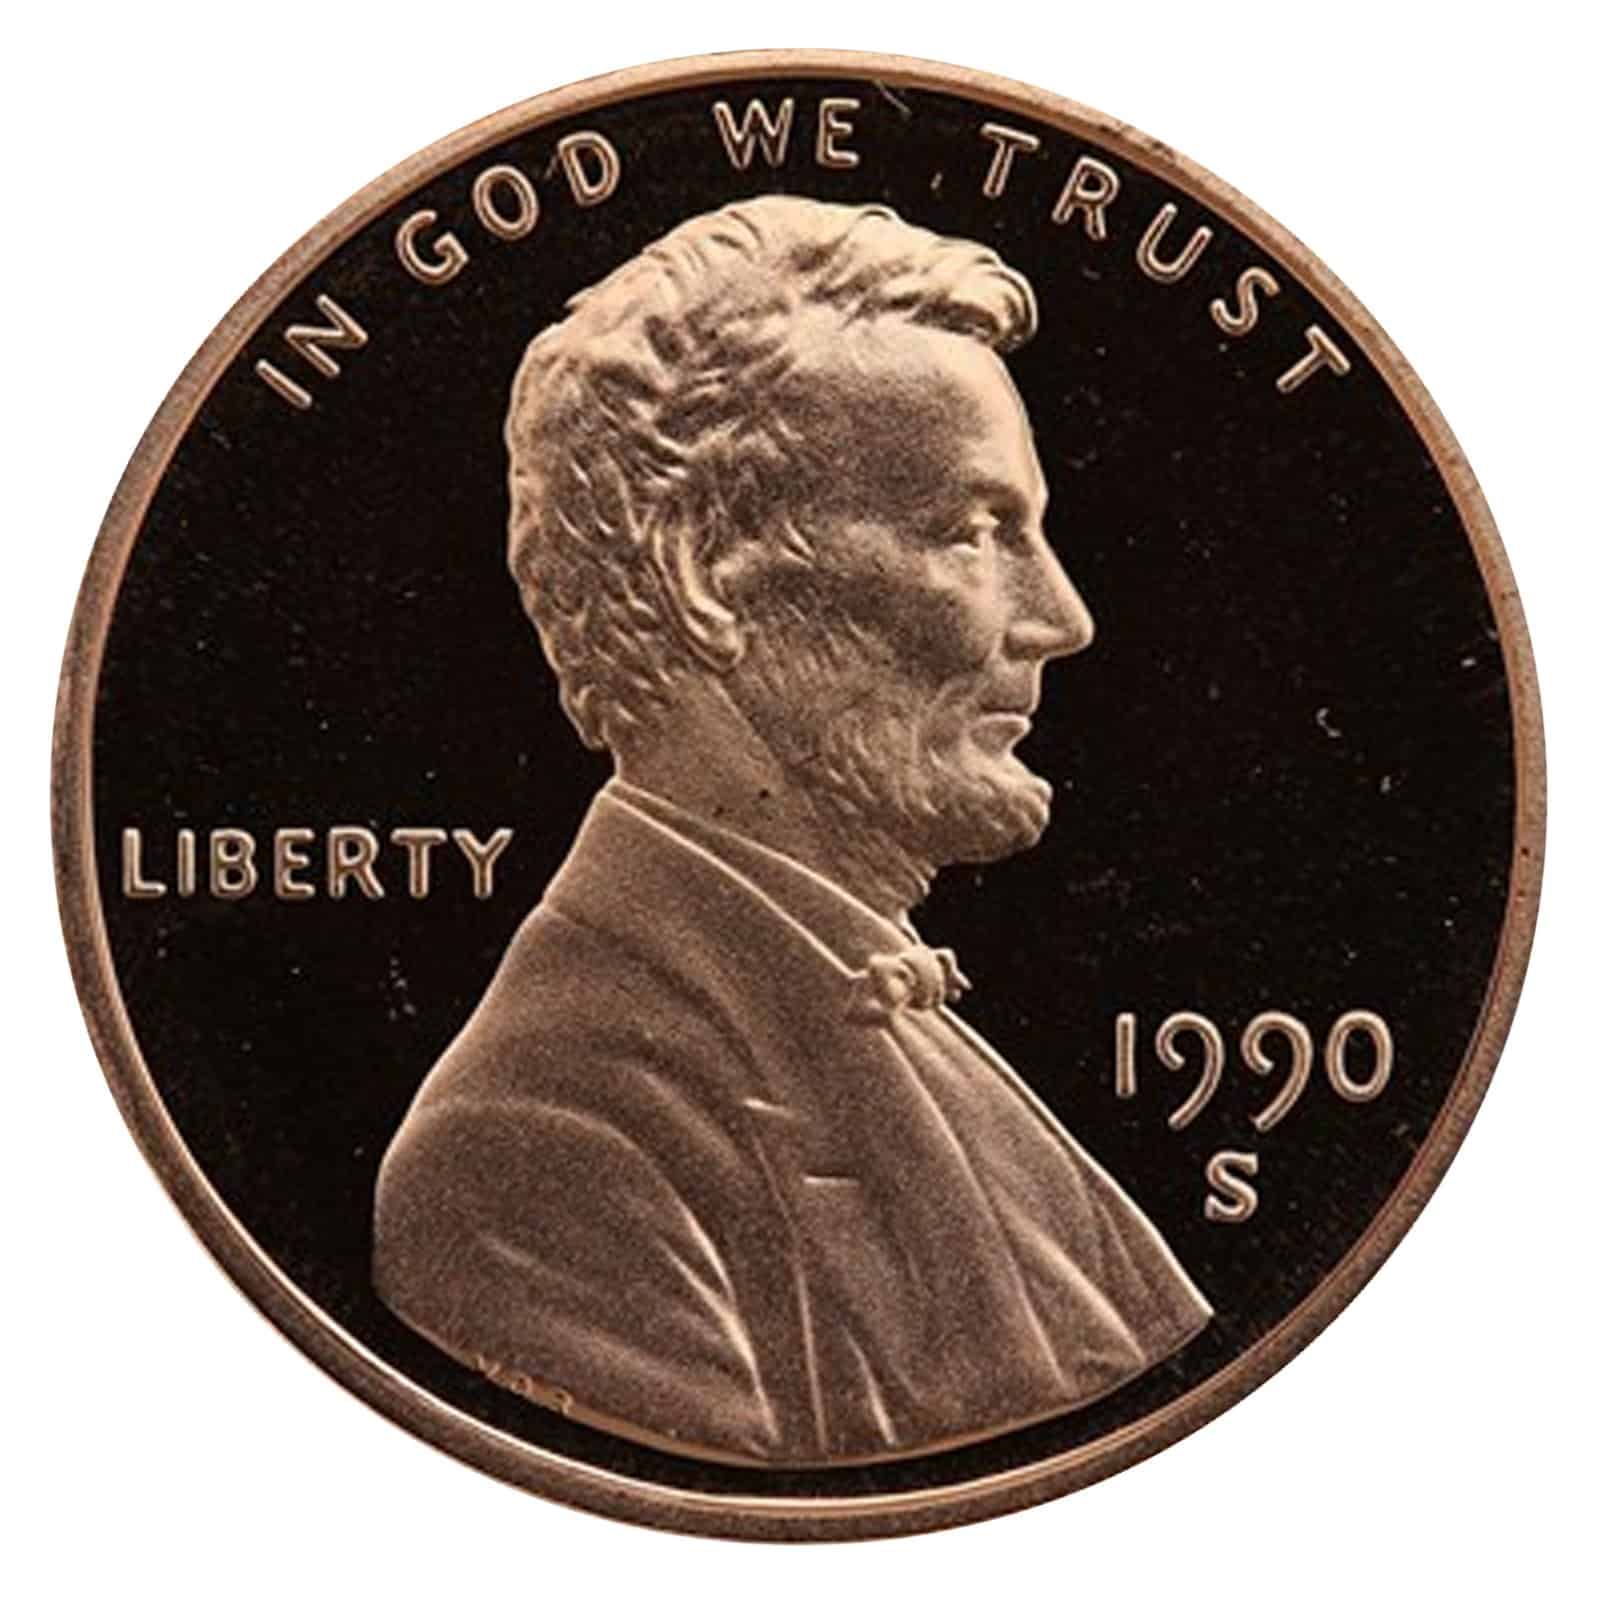 Which 1990s penny has the potential to be worth over $20,000?
